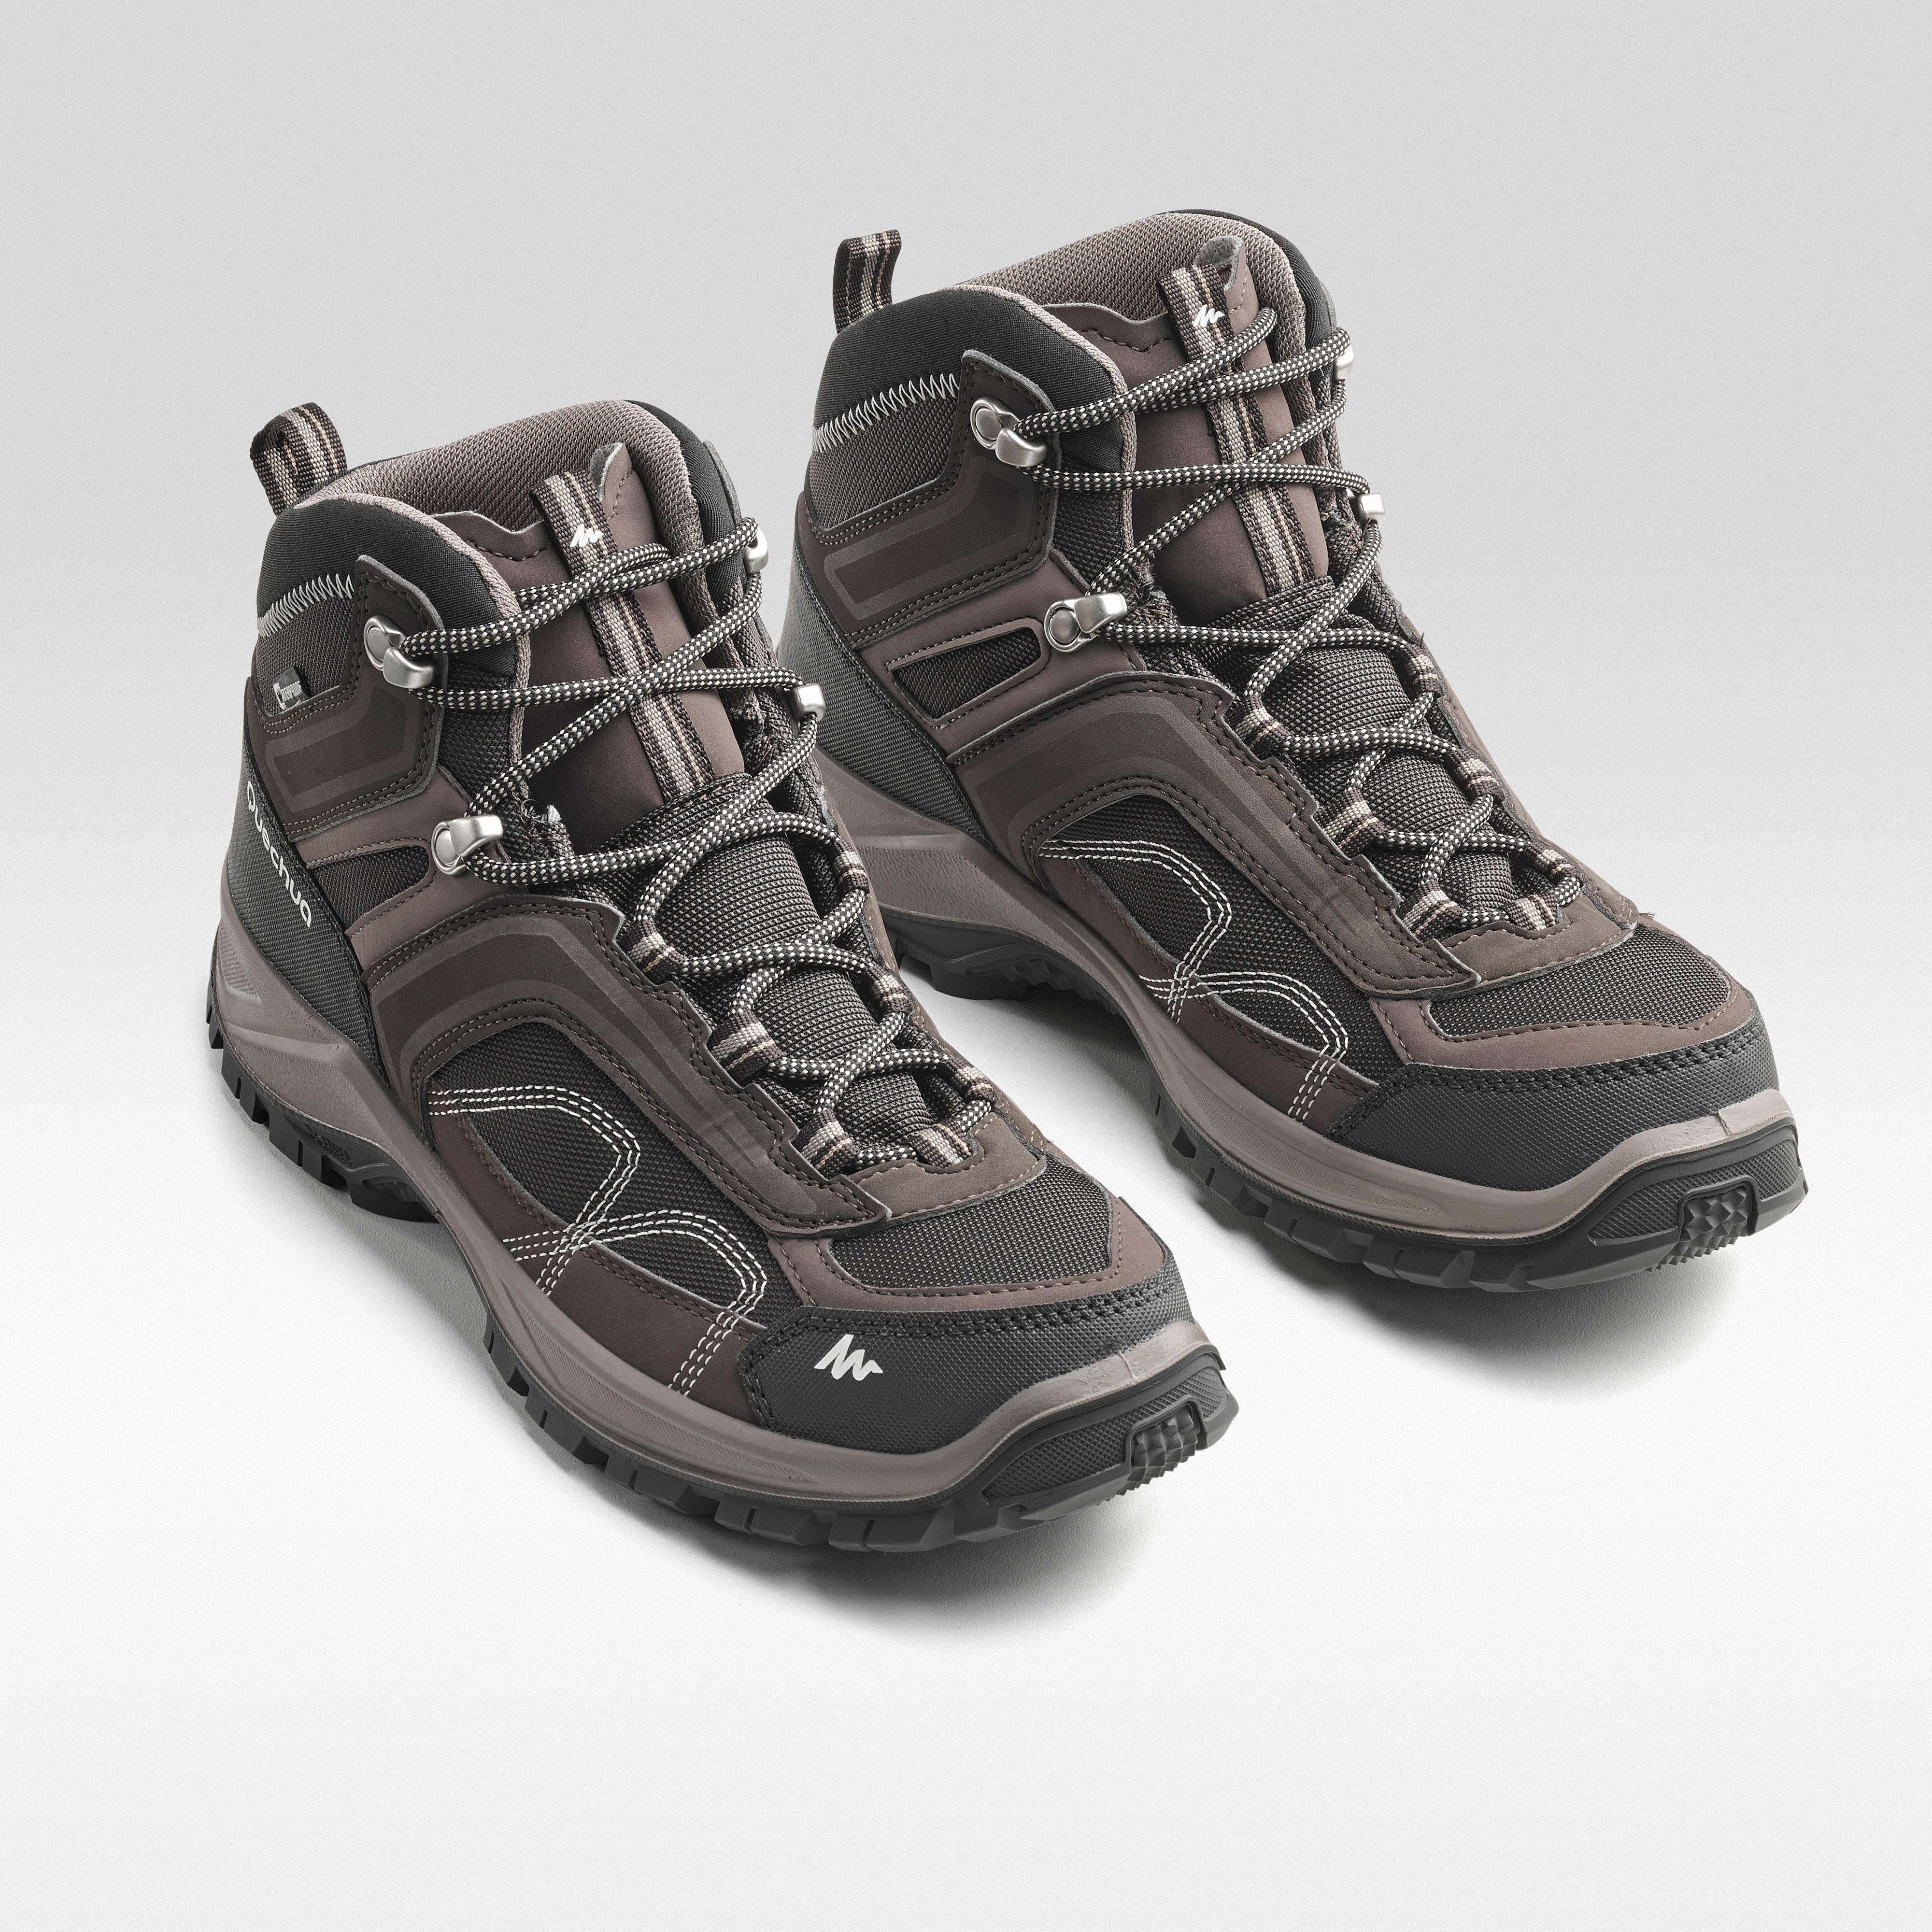 MH100 Mid waterproof Men's Hiking shoes 